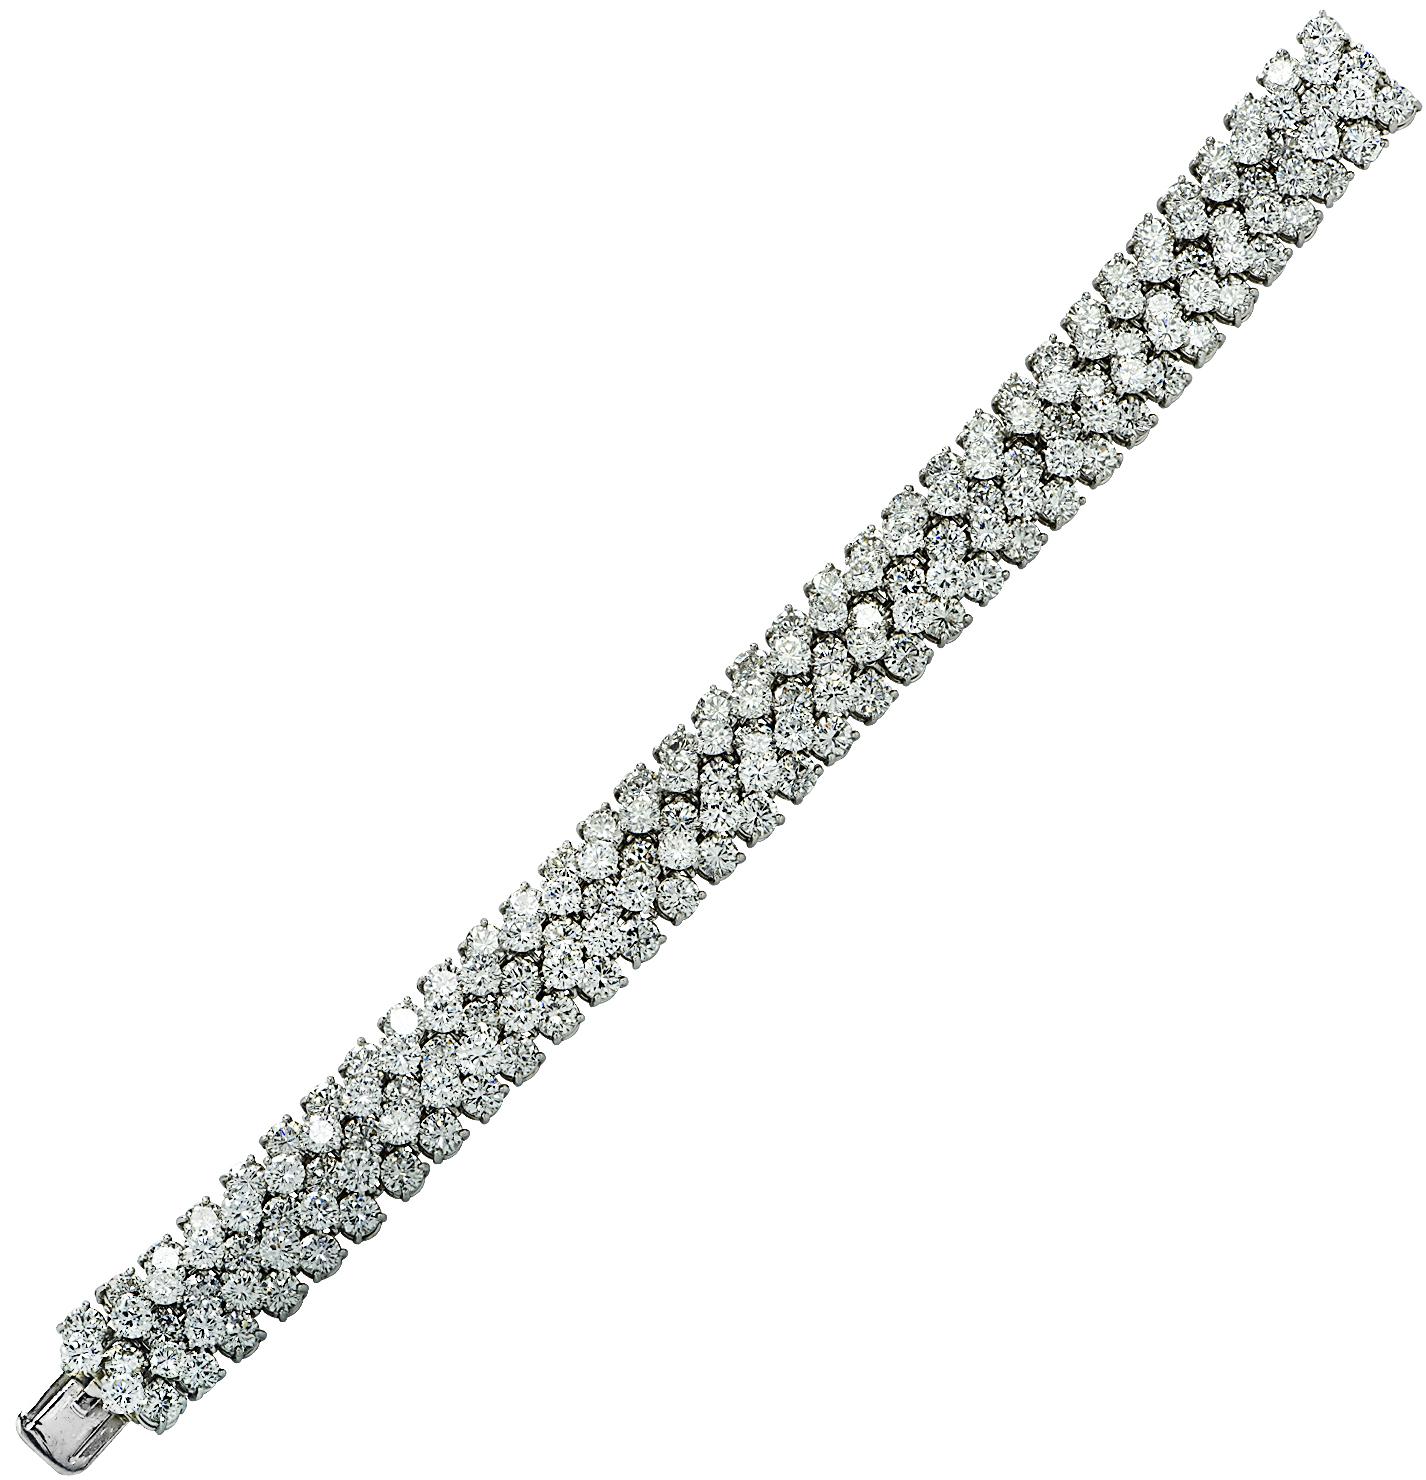 Spectacular Oscar Heyman diamond bangle bracelet Circa 1970, finely crafted by hand in platinum, featuring 170 round brilliant cut diamonds weighing approximately 30 carats total, E color, VS clarity. Dynamic layers of diamonds, varying in size,